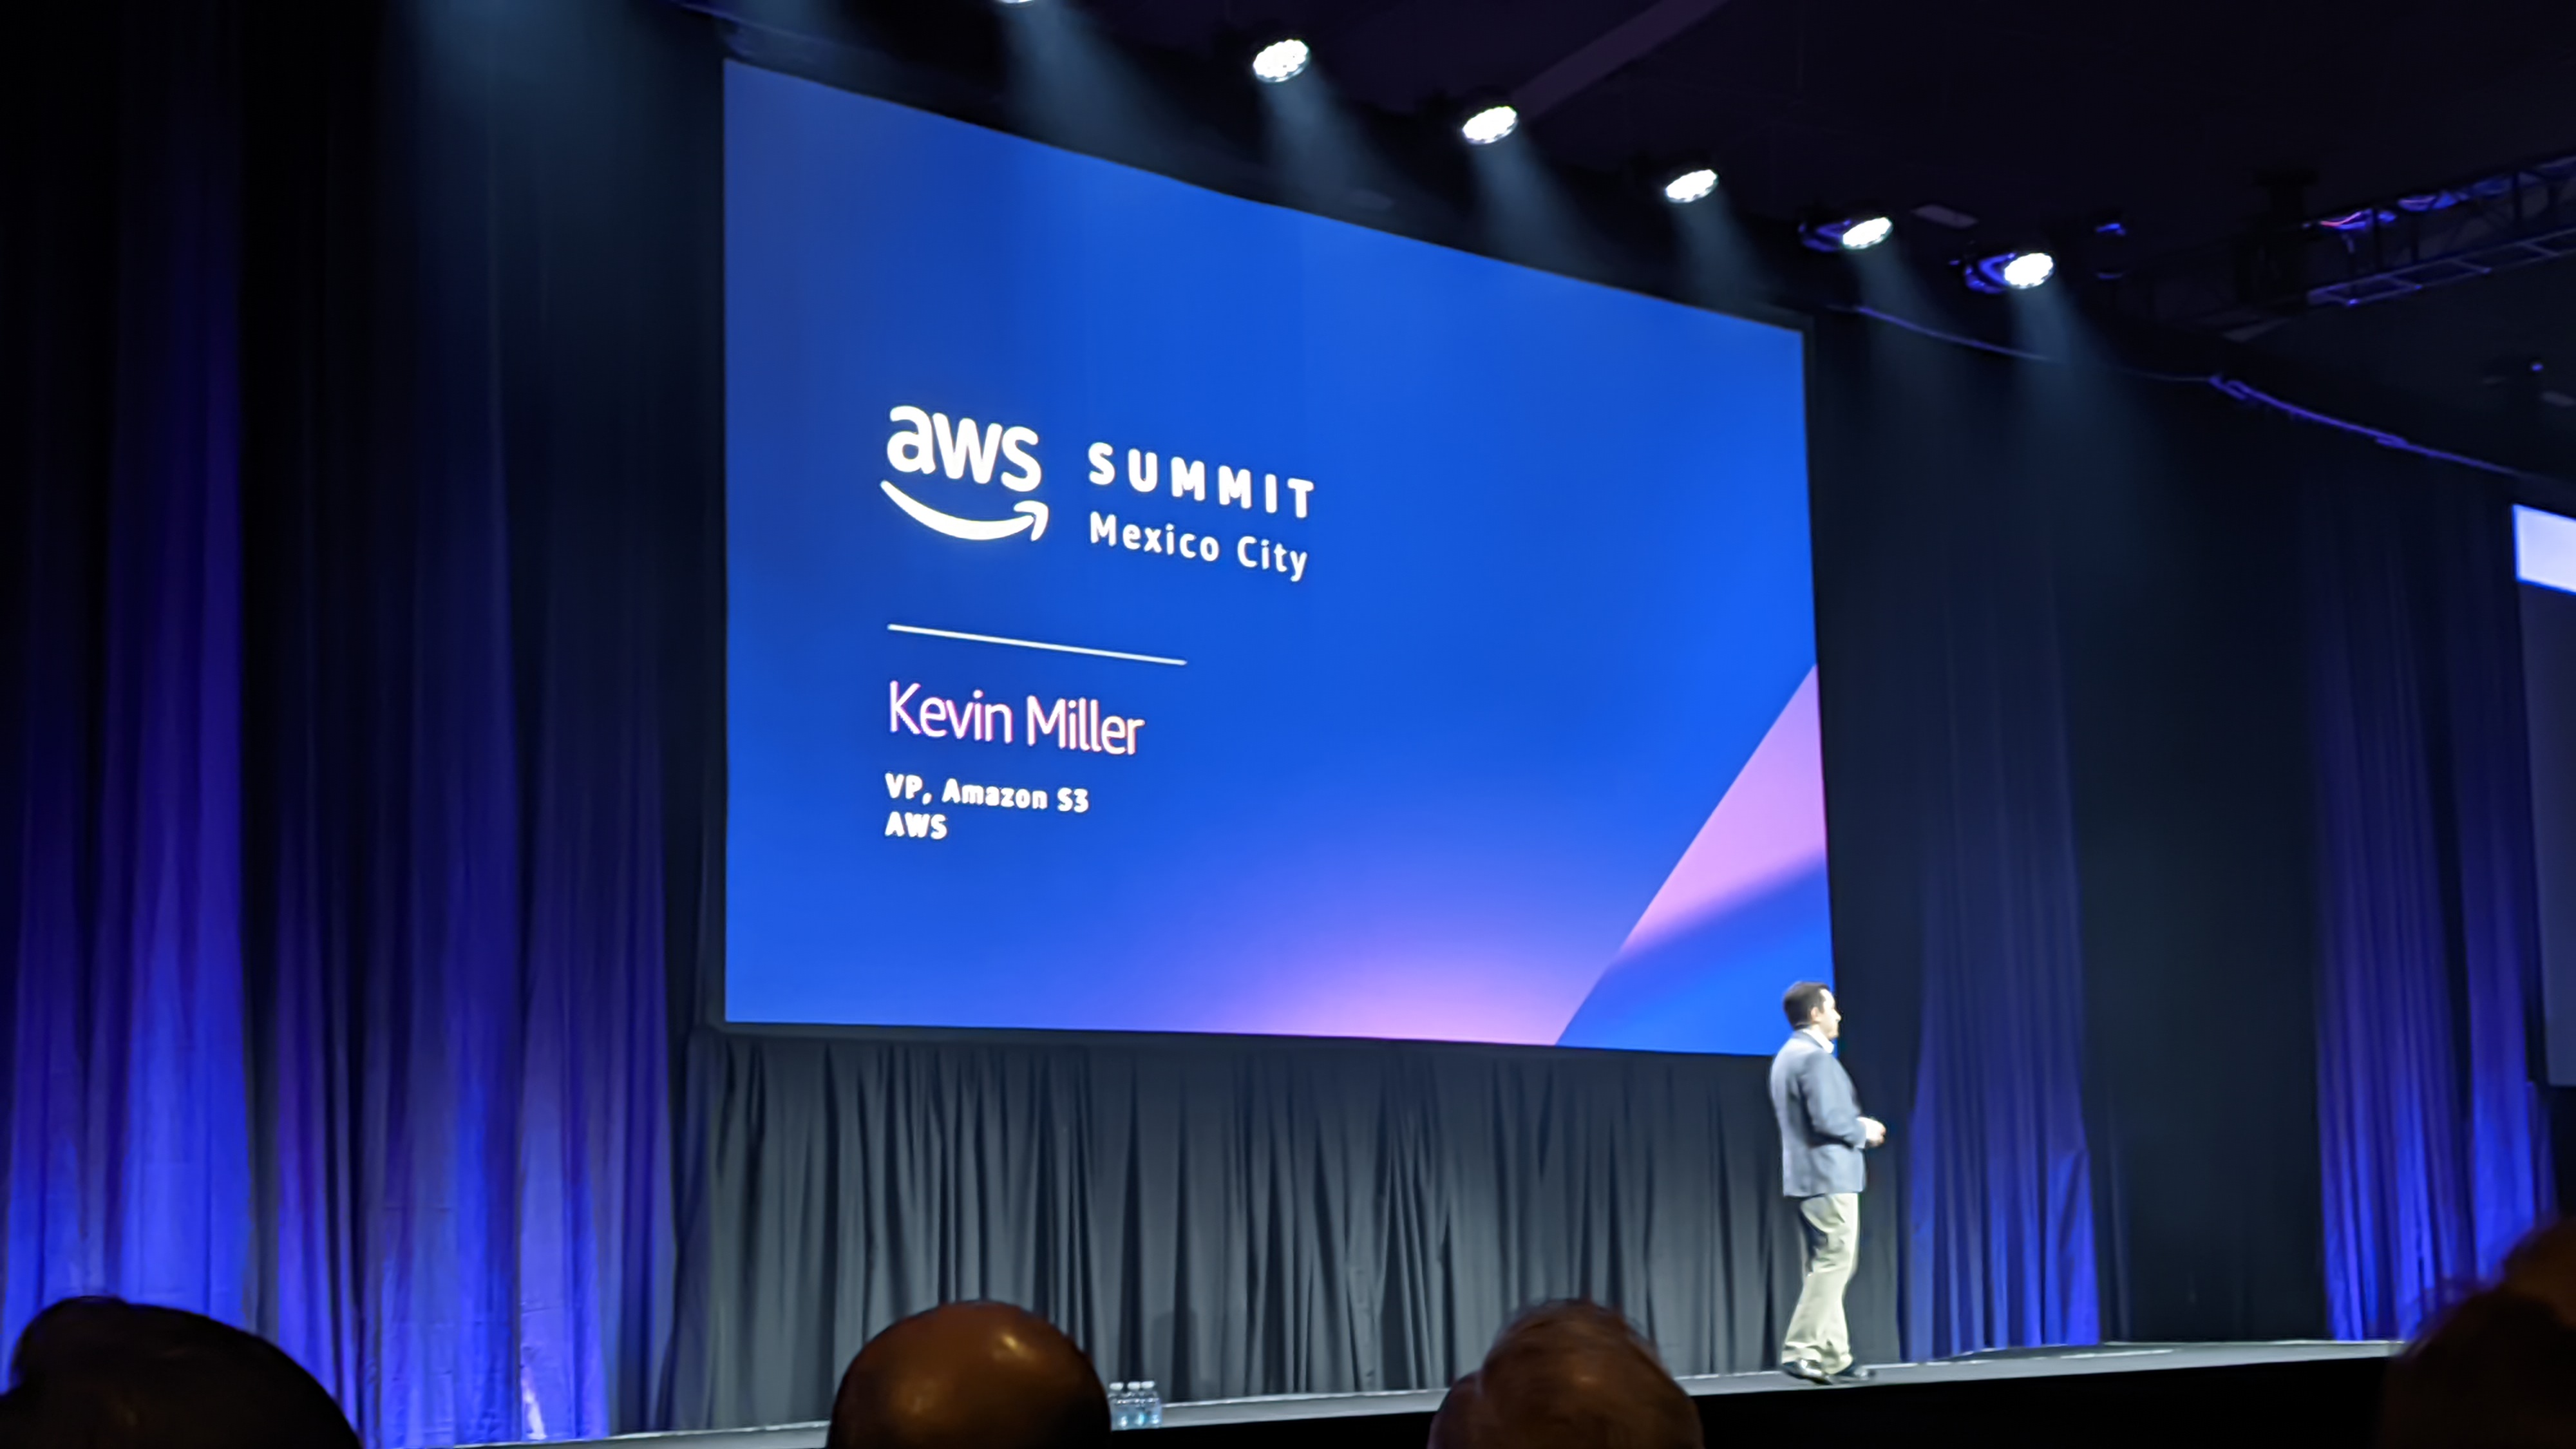 AWS Summit Mexico City - Kevin Miller